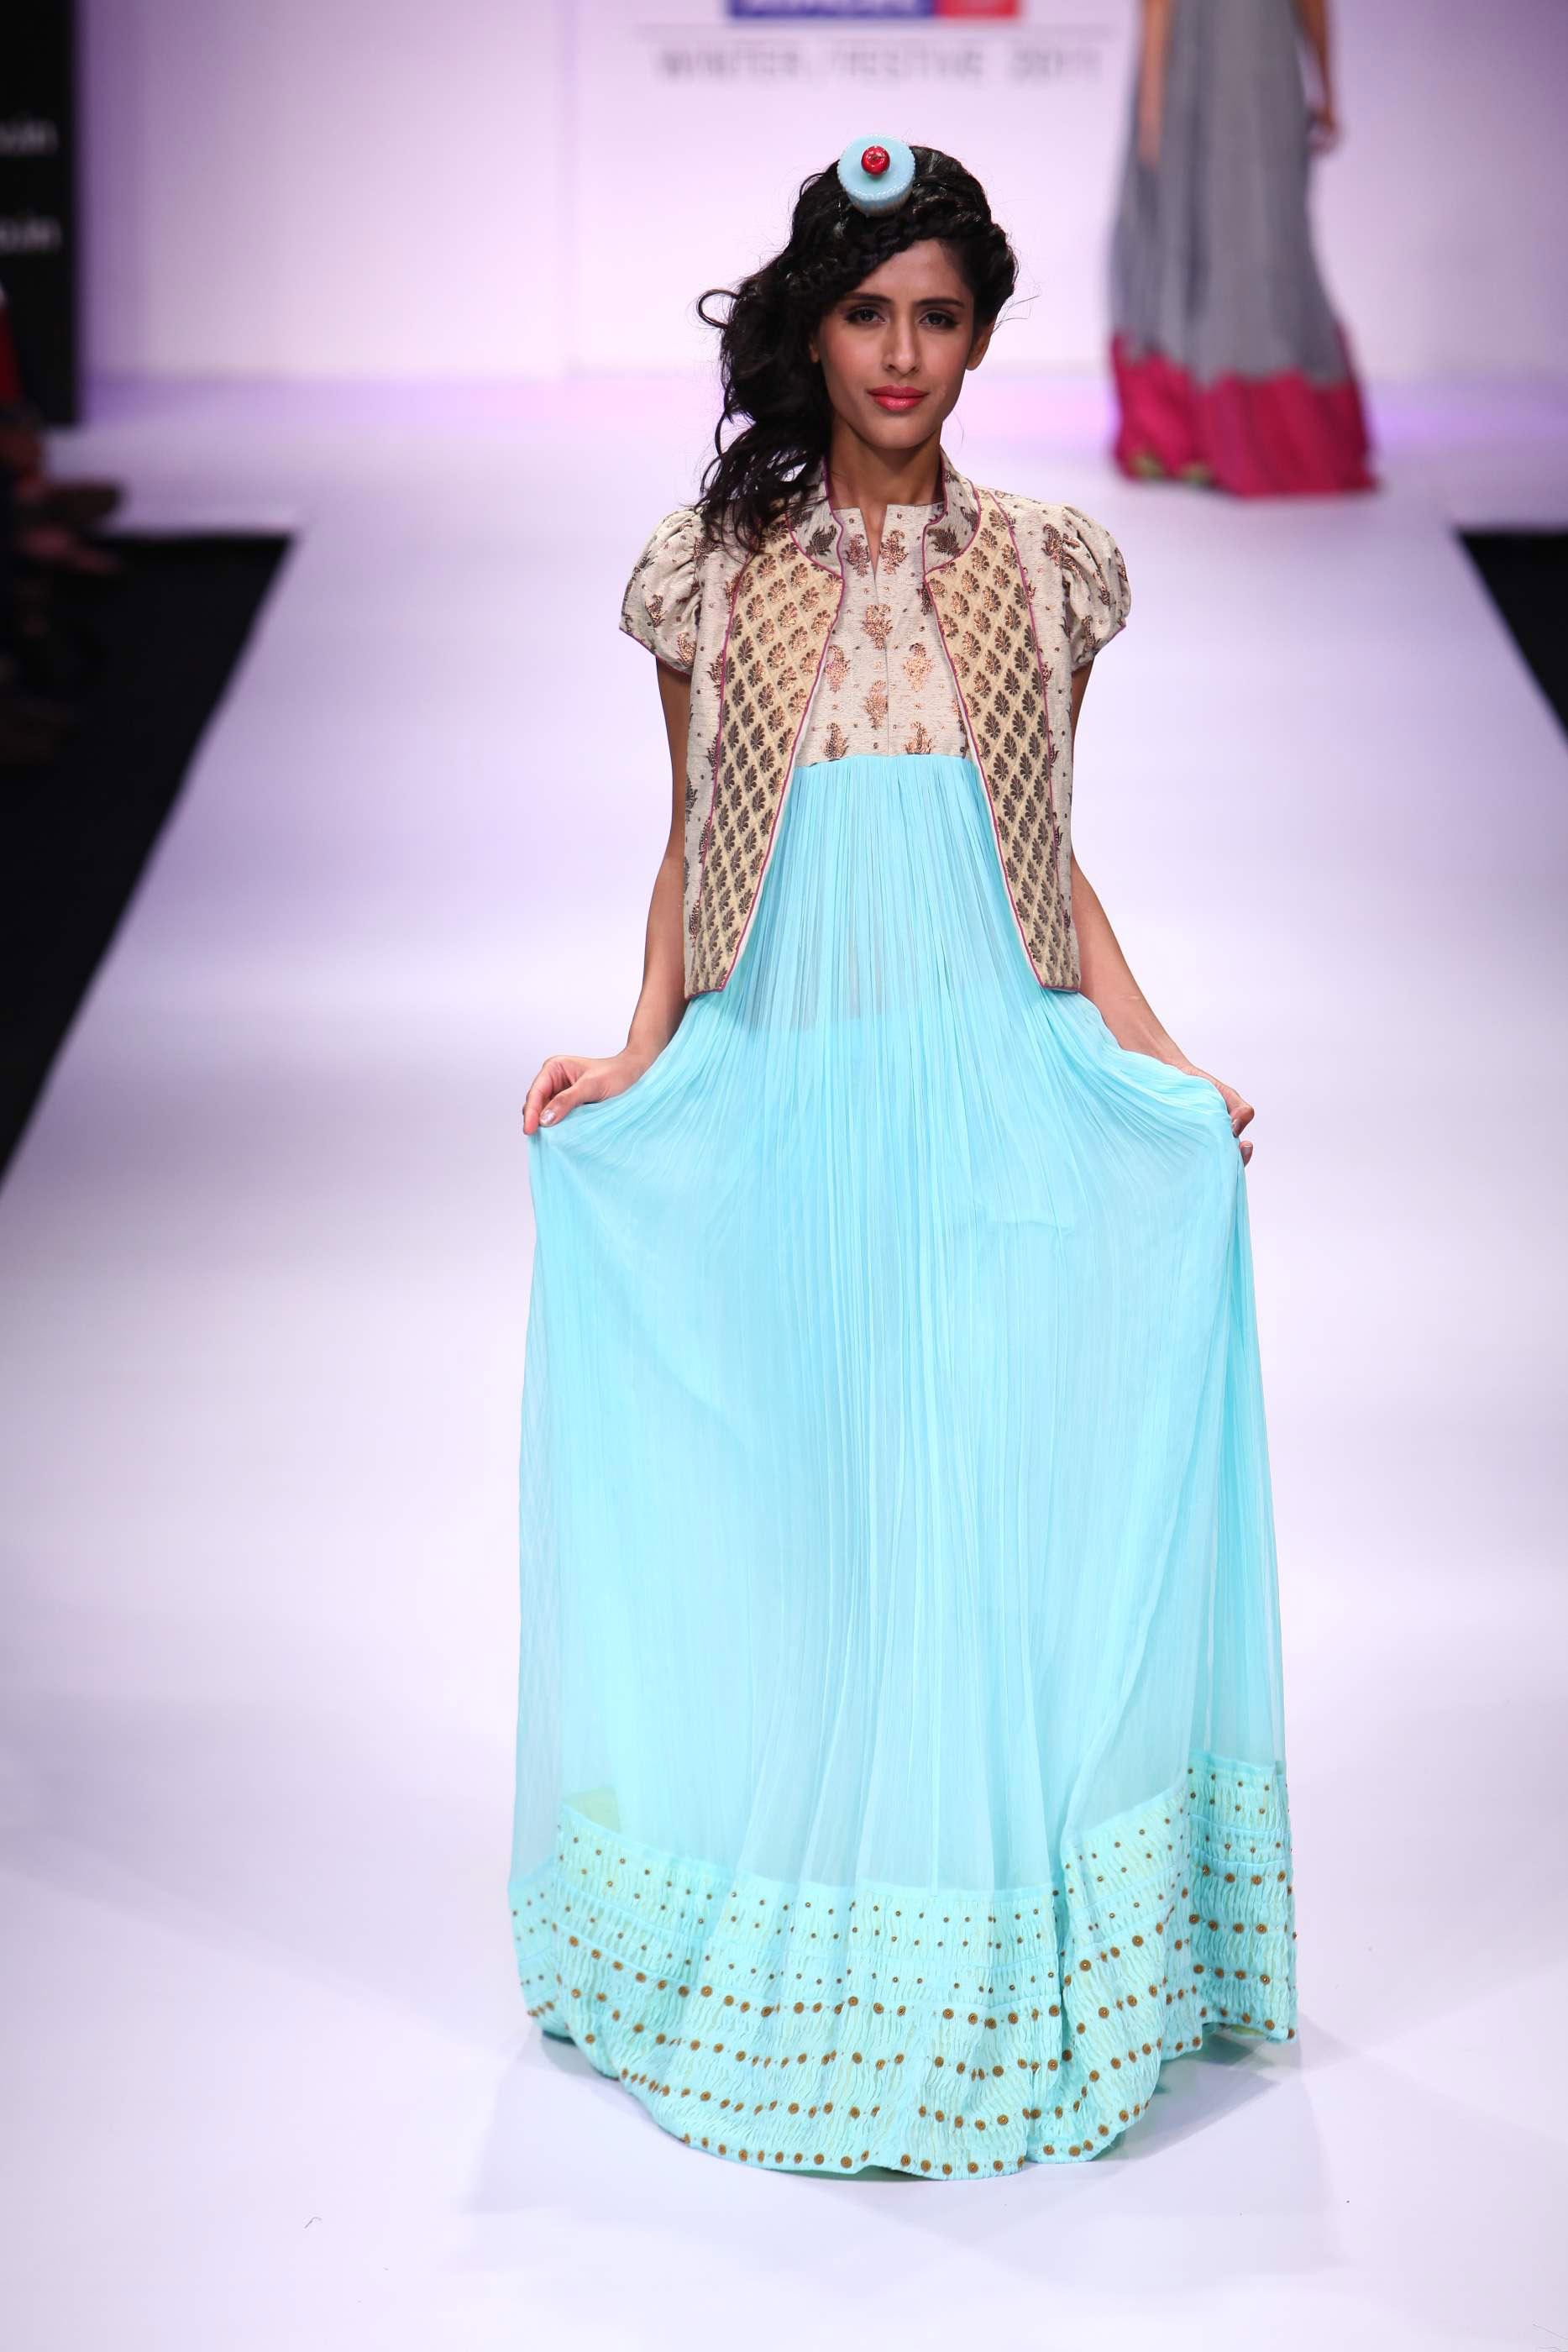 Lakme Fashion Week 2011 Day 3 Pictures | Picture 62297